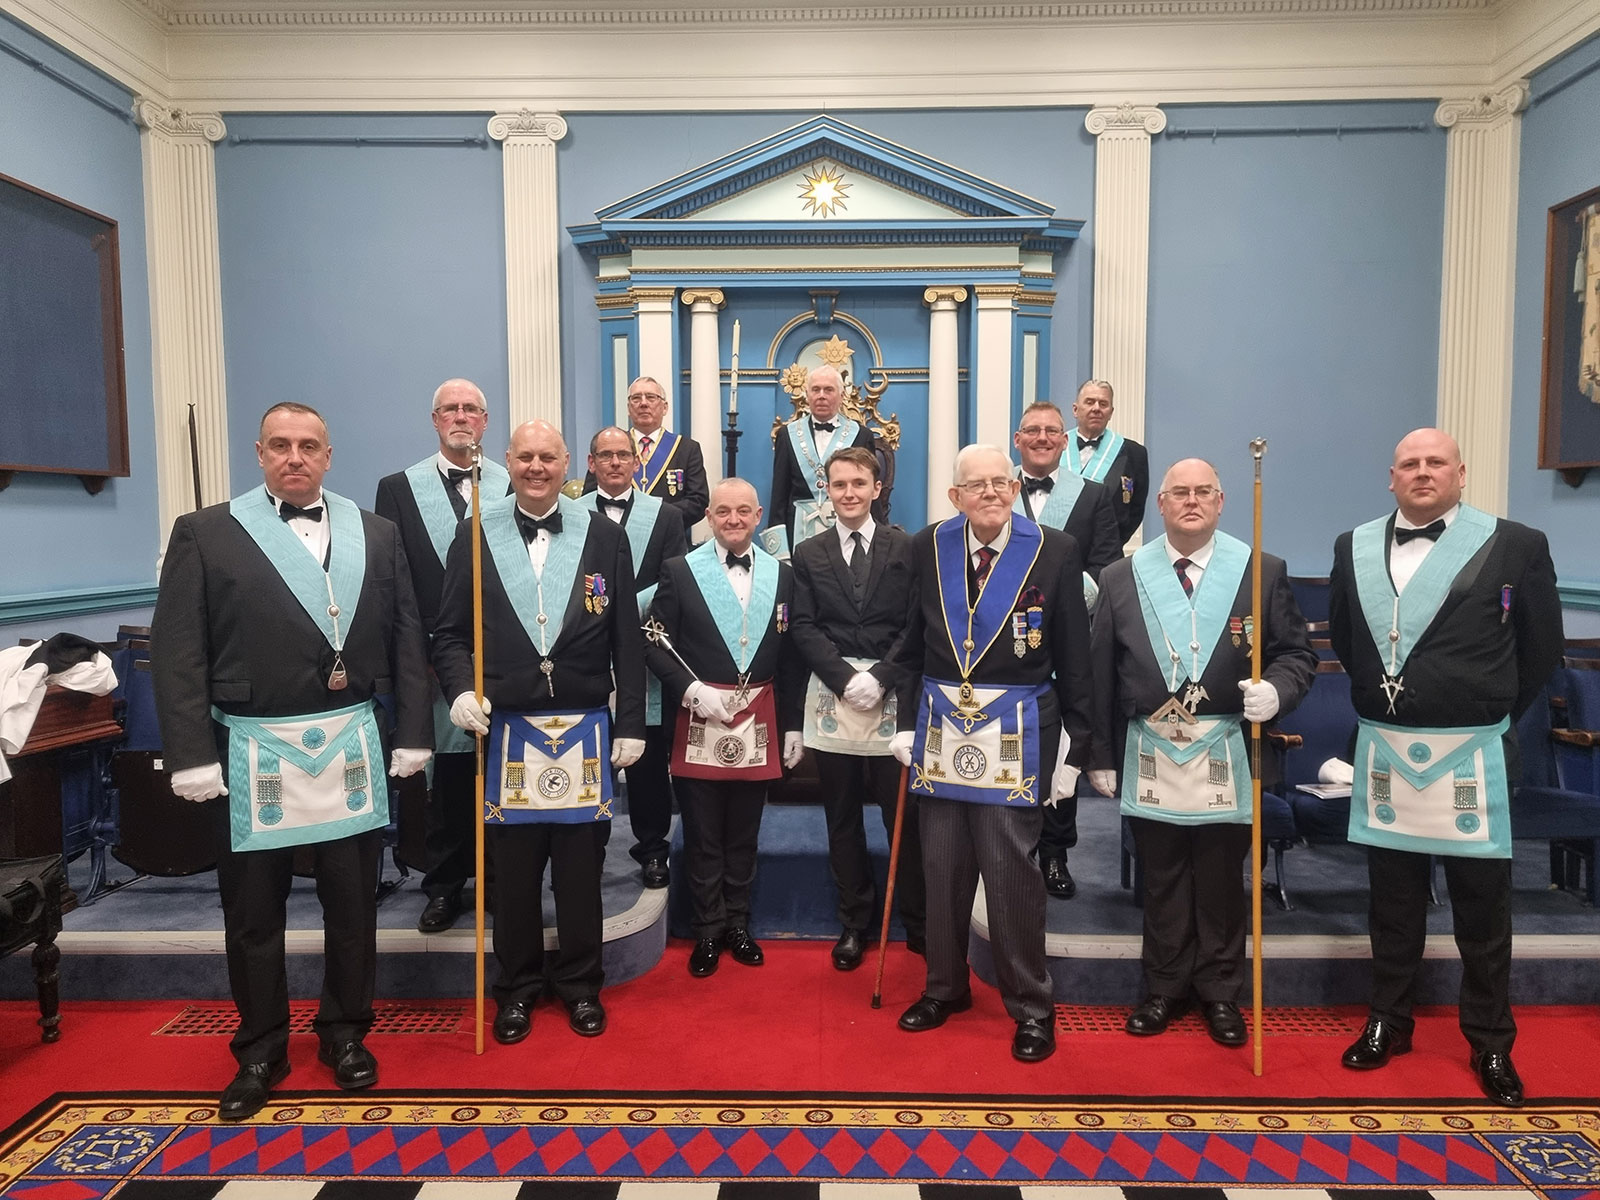 Members of Lodge of Concord No. 4910